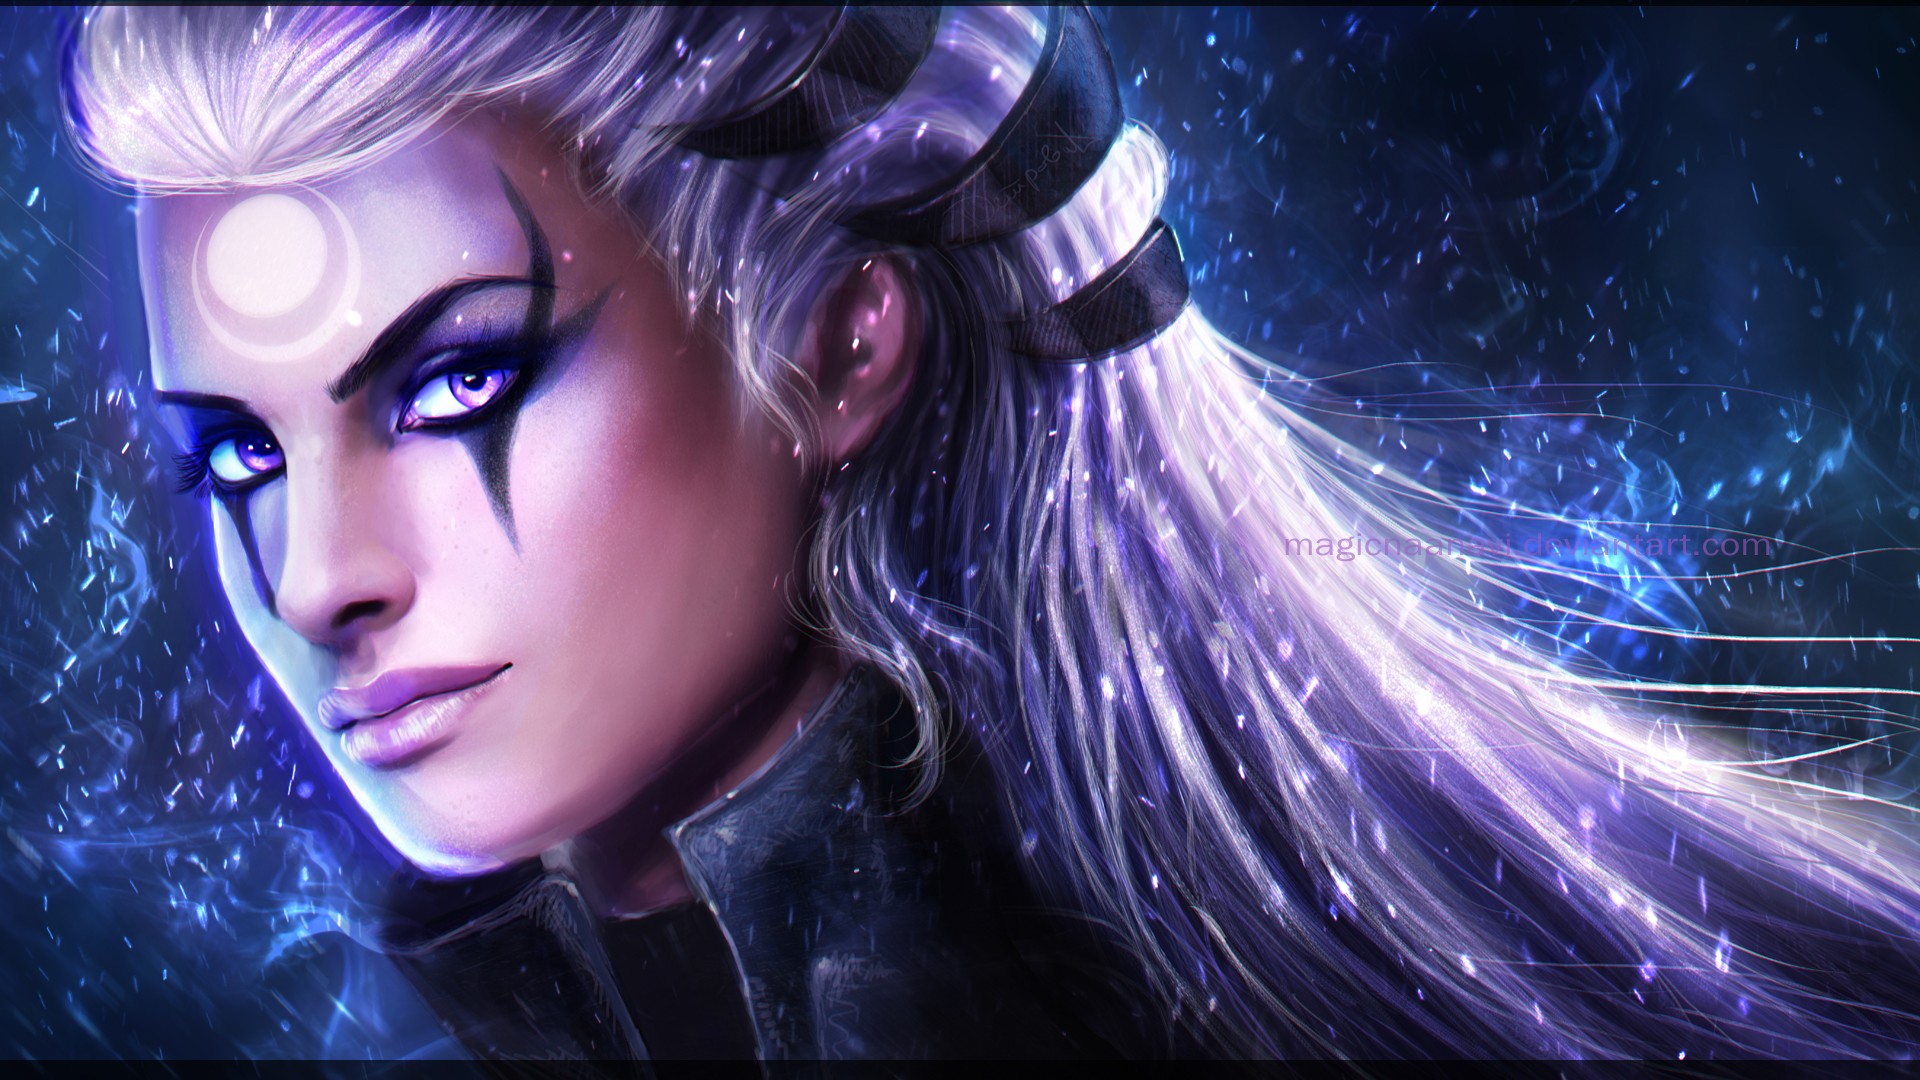 Anime Girls Anime Realistic League Of Legends Diana Riot Games MagicnaAnavi 1920x1080